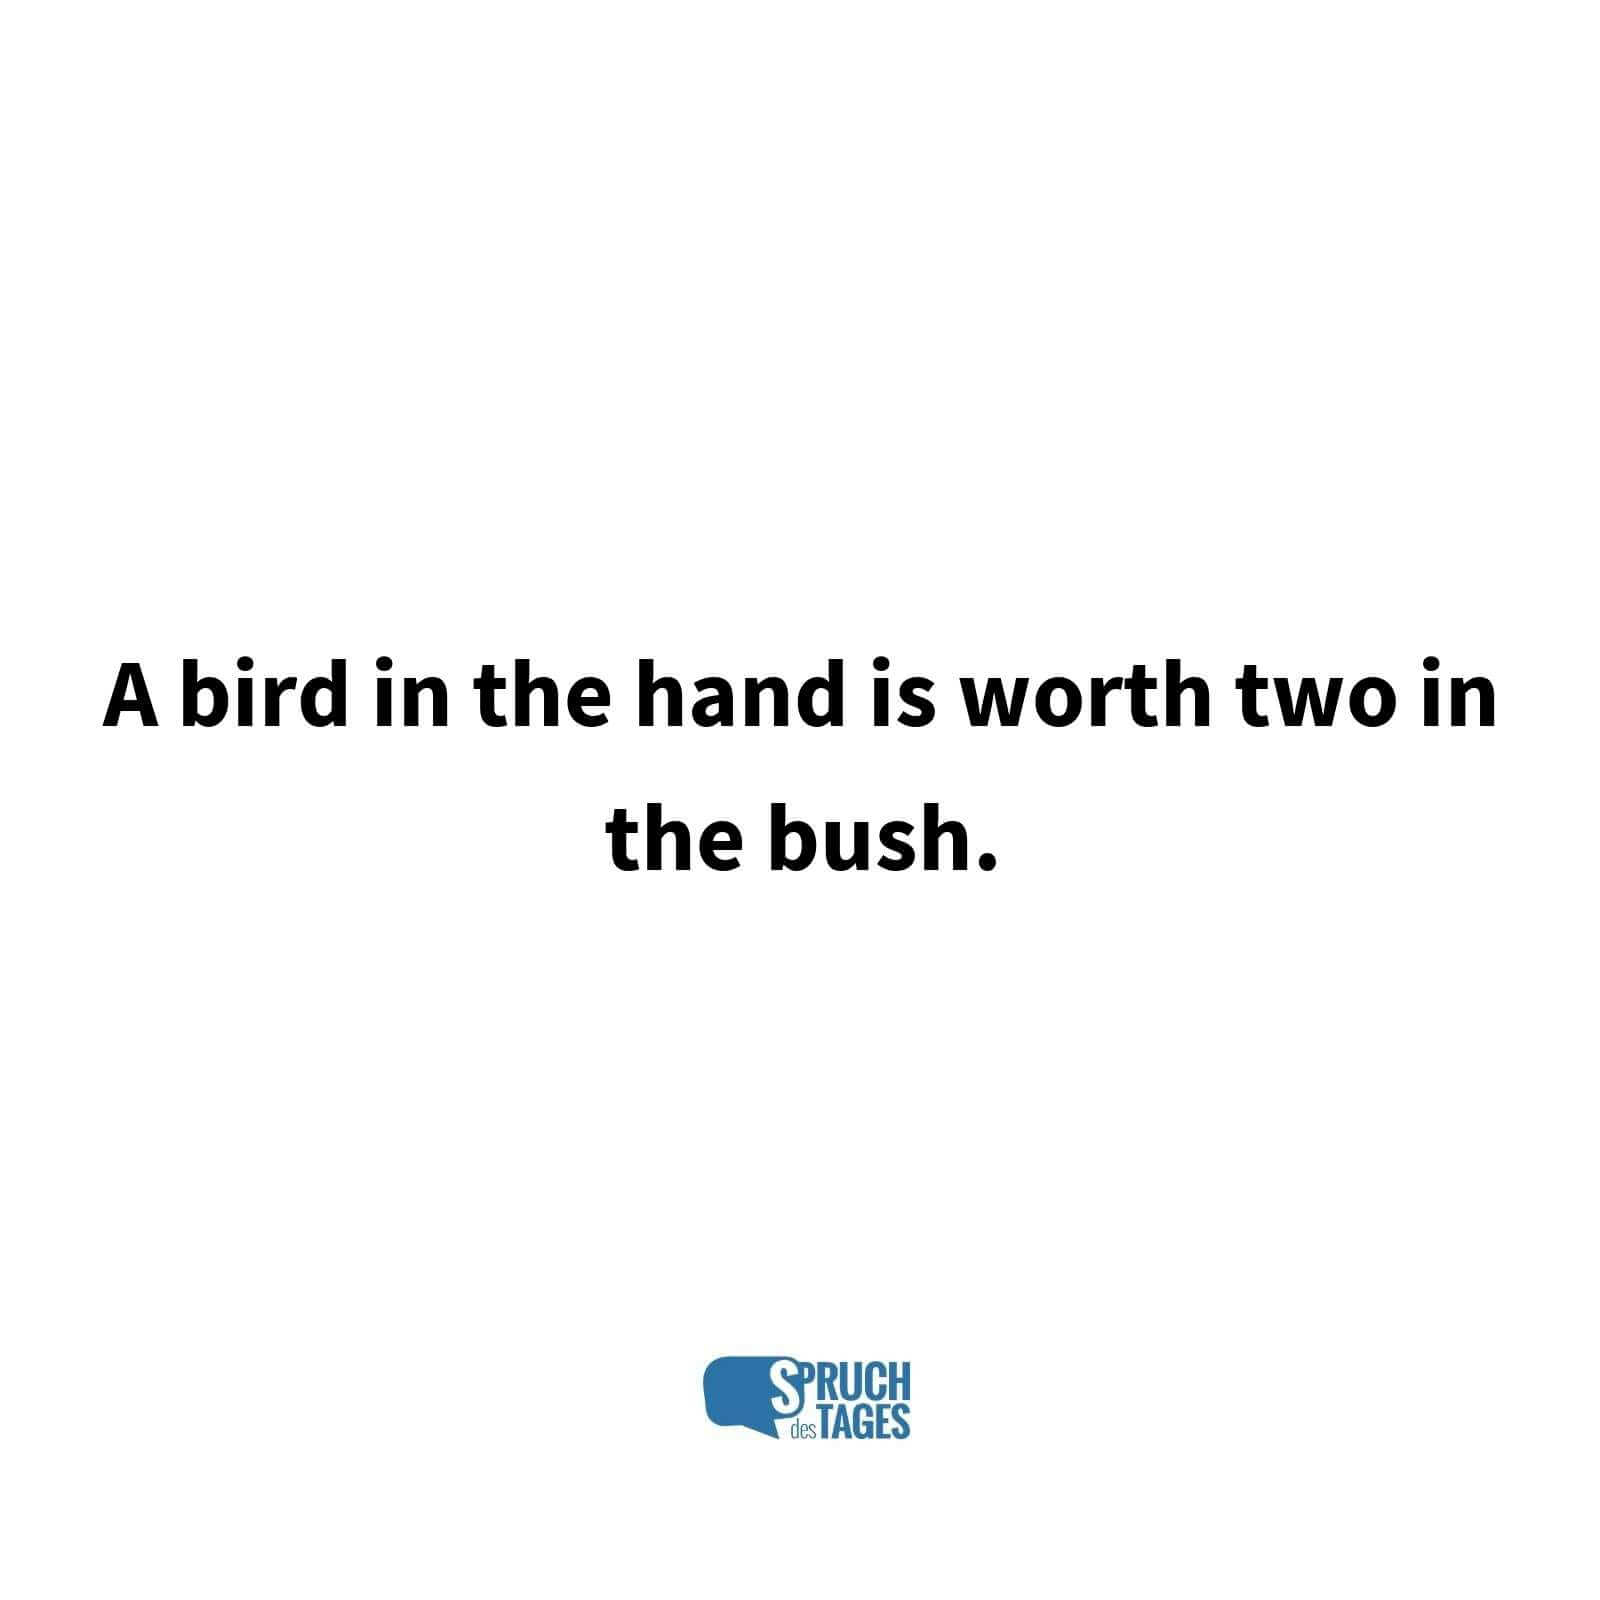 A bird in the hand is worth two in the bush.